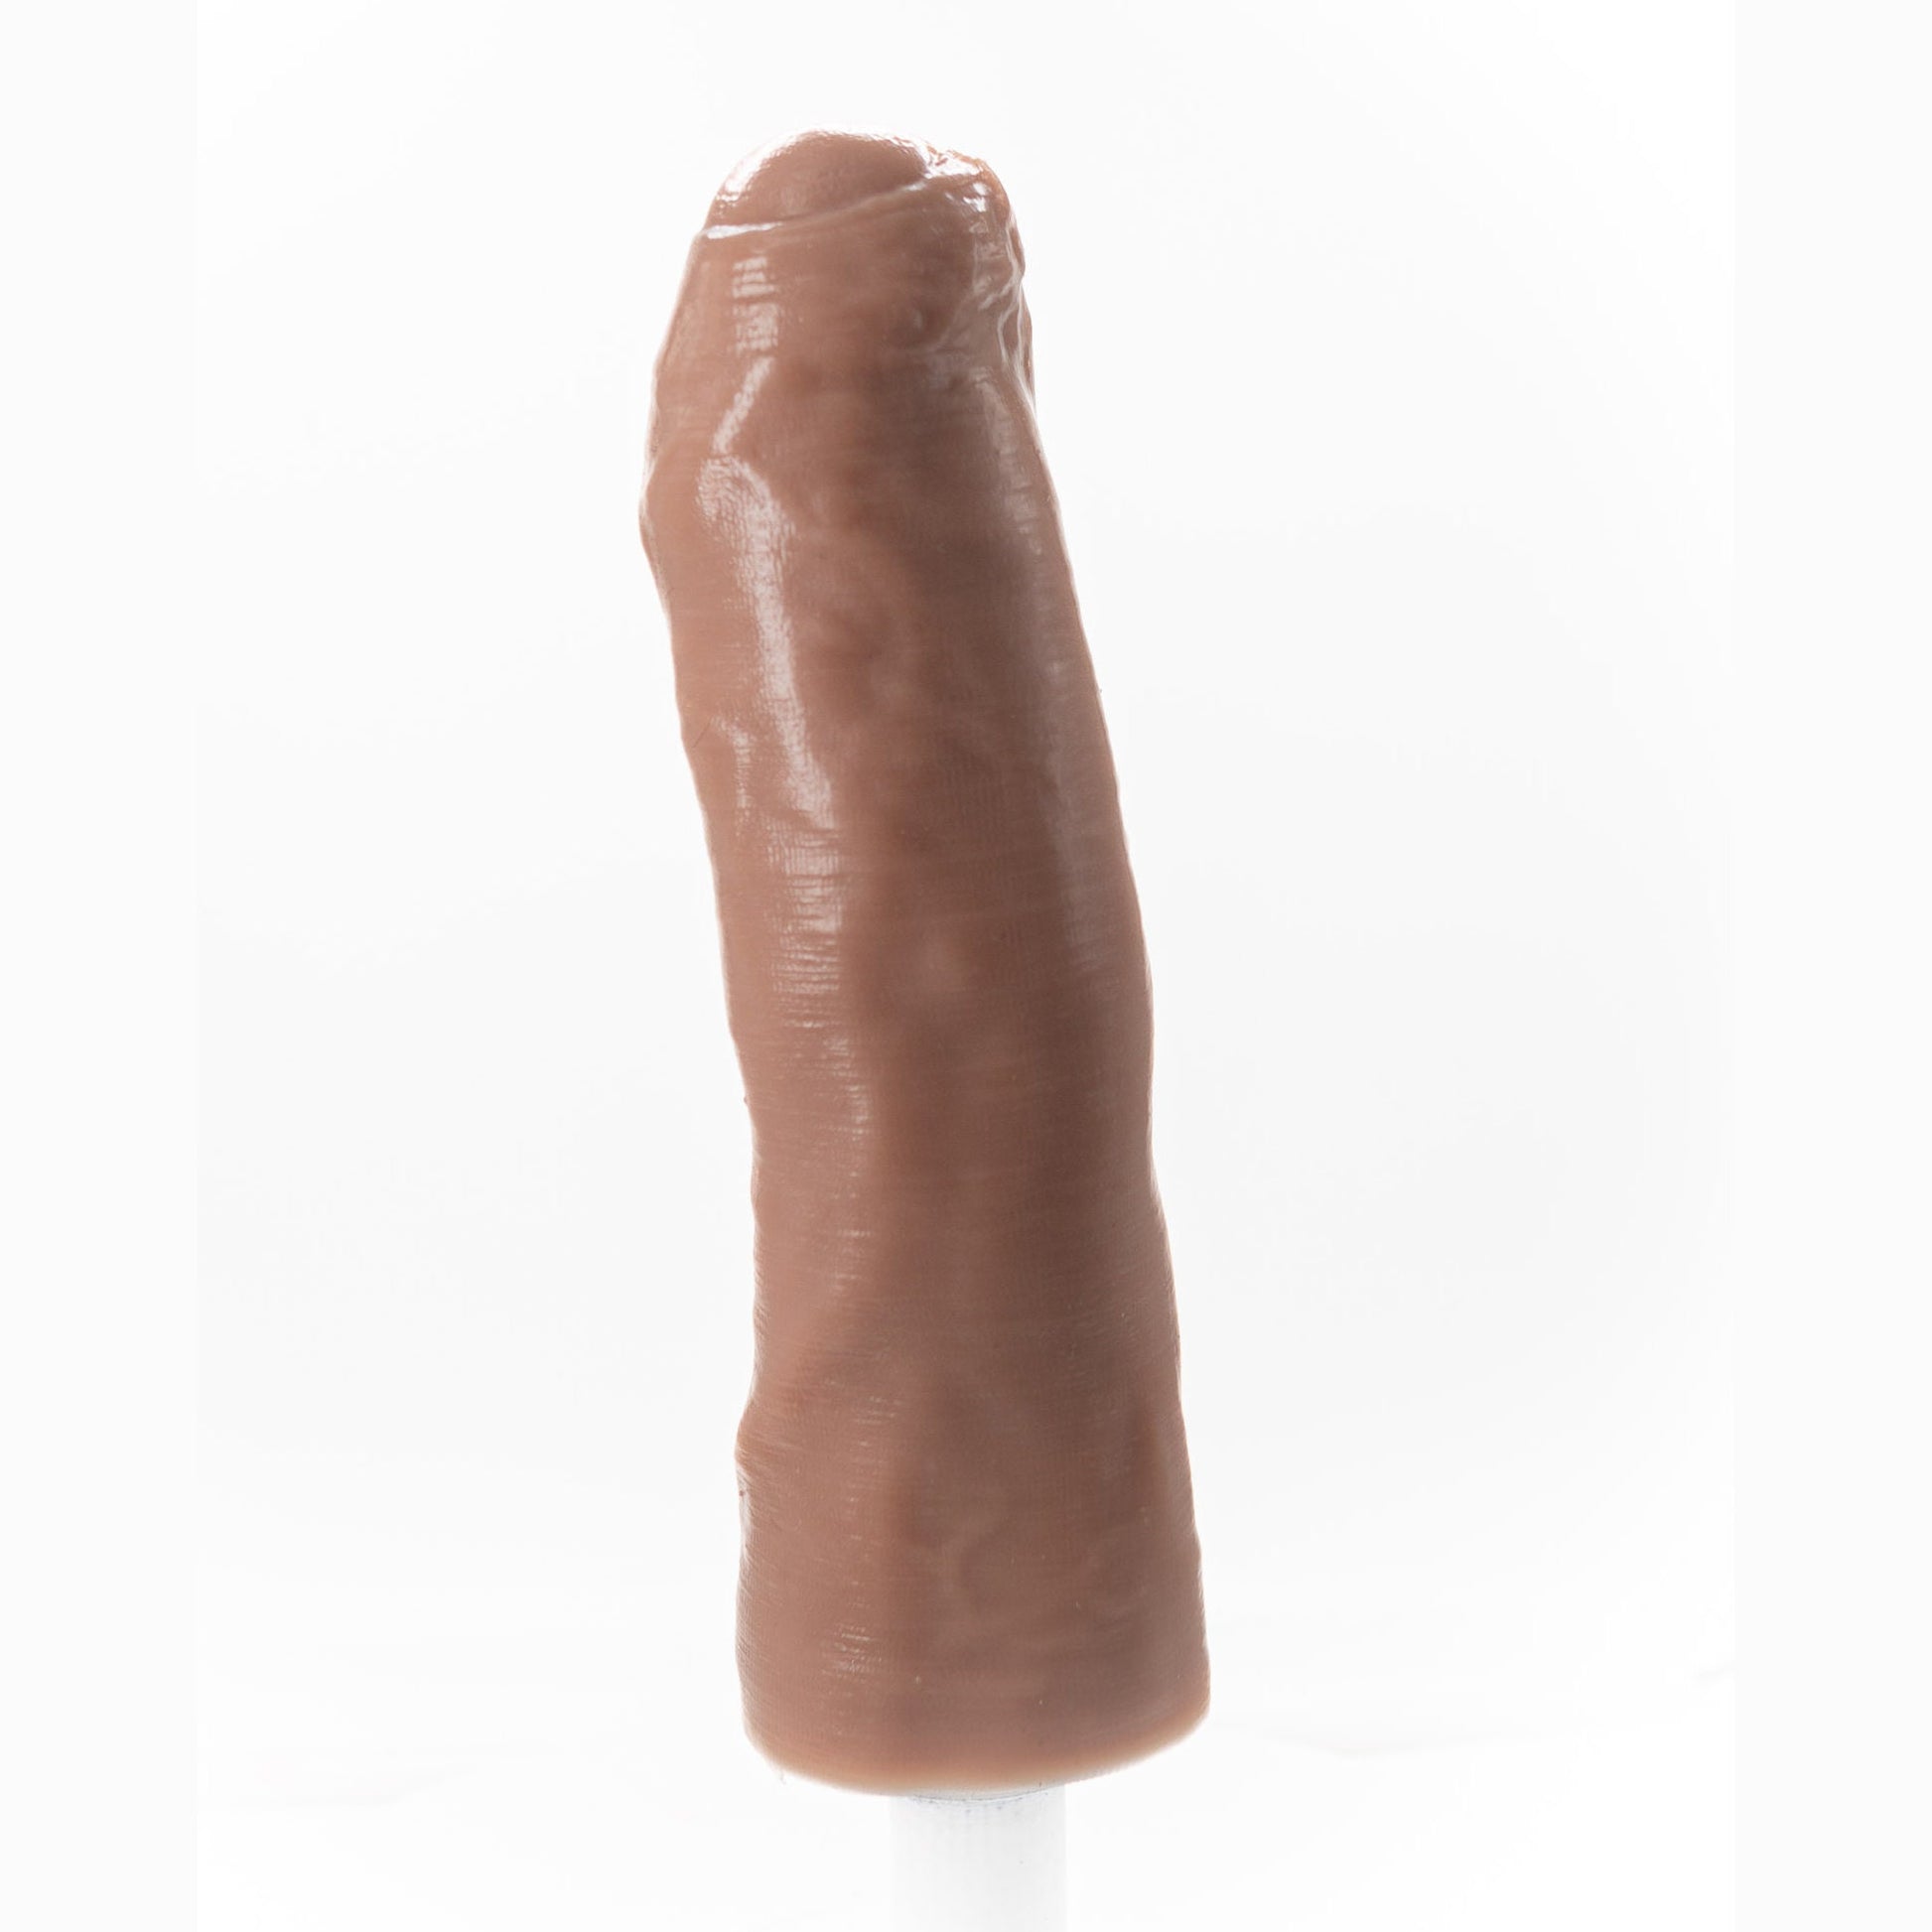 8.5 inch realistic penis sleeve/strap on - modeled after a real guy